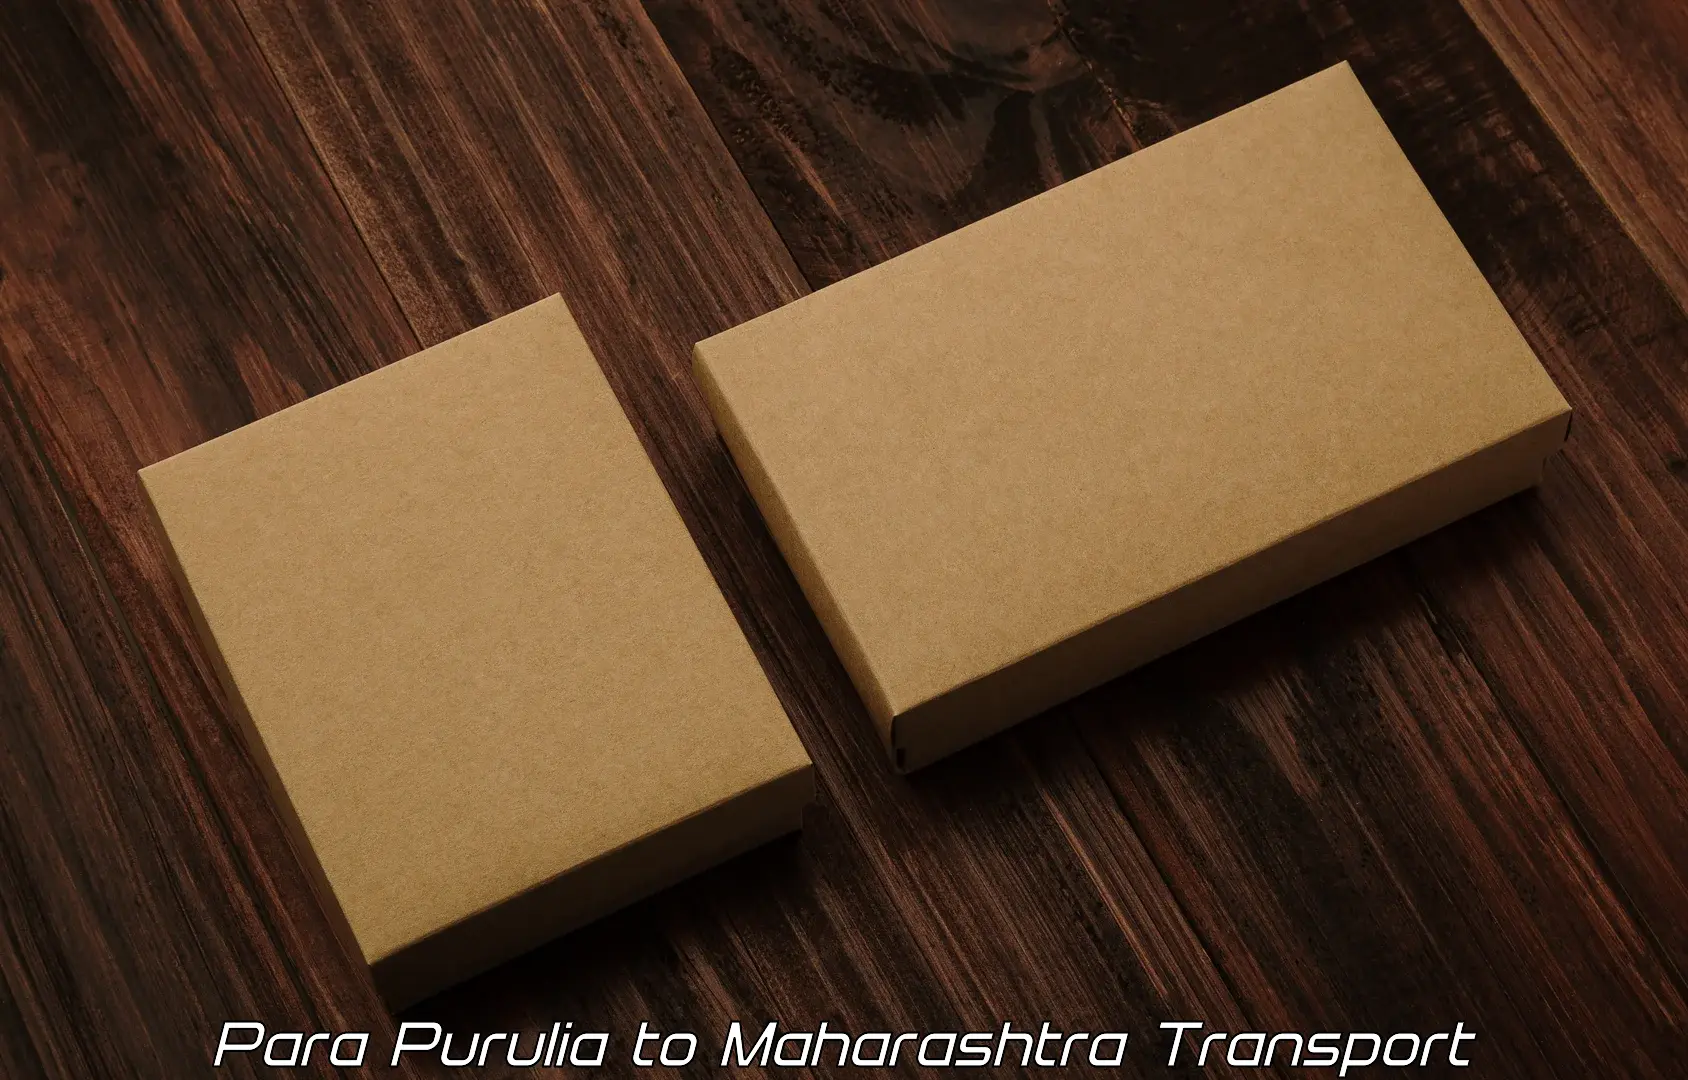 Online transport booking in Para Purulia to Alephata